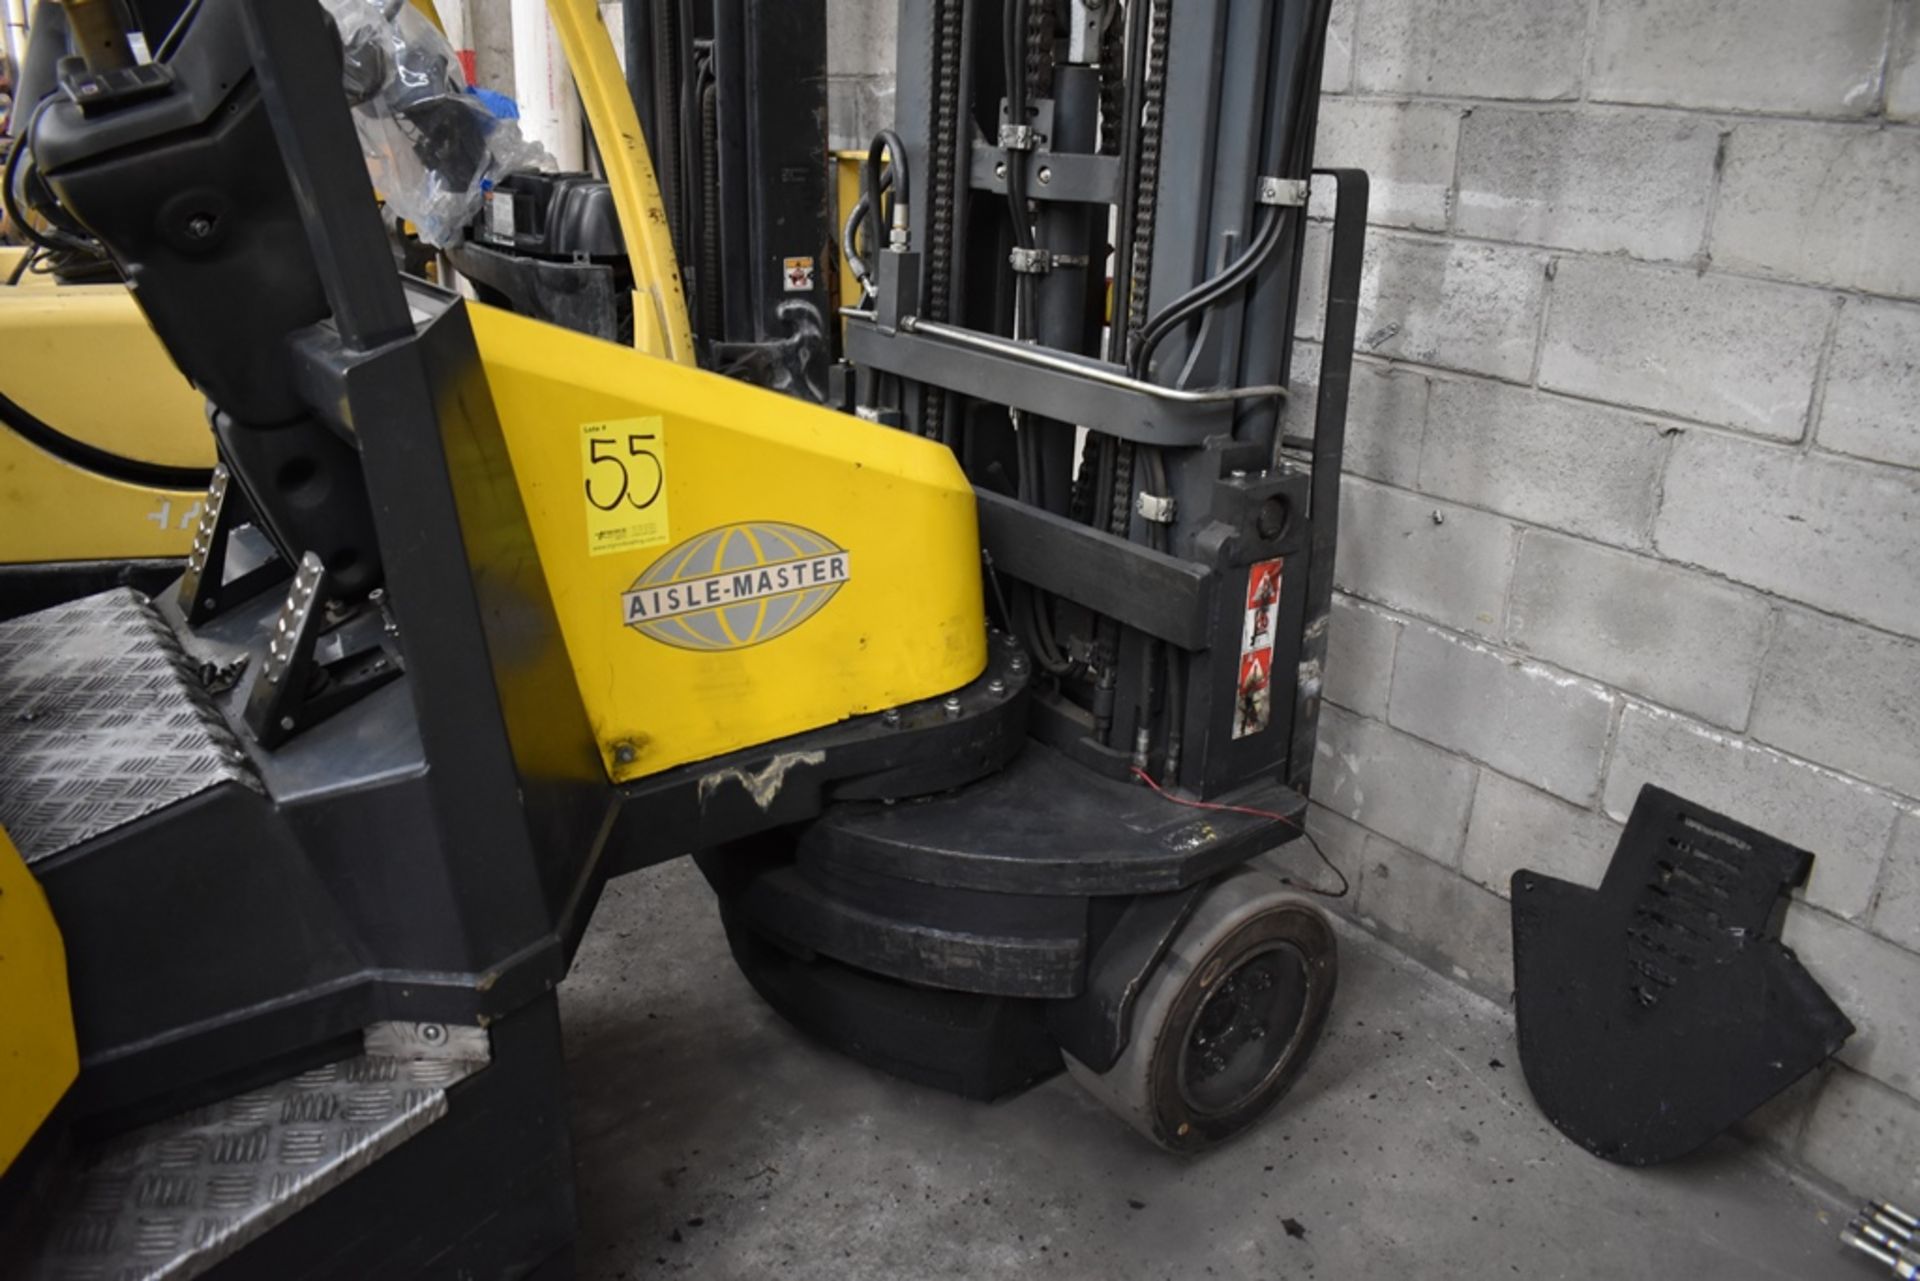 Aisle-master Forklift, model 20S, 2 tons capacity - Image 16 of 50